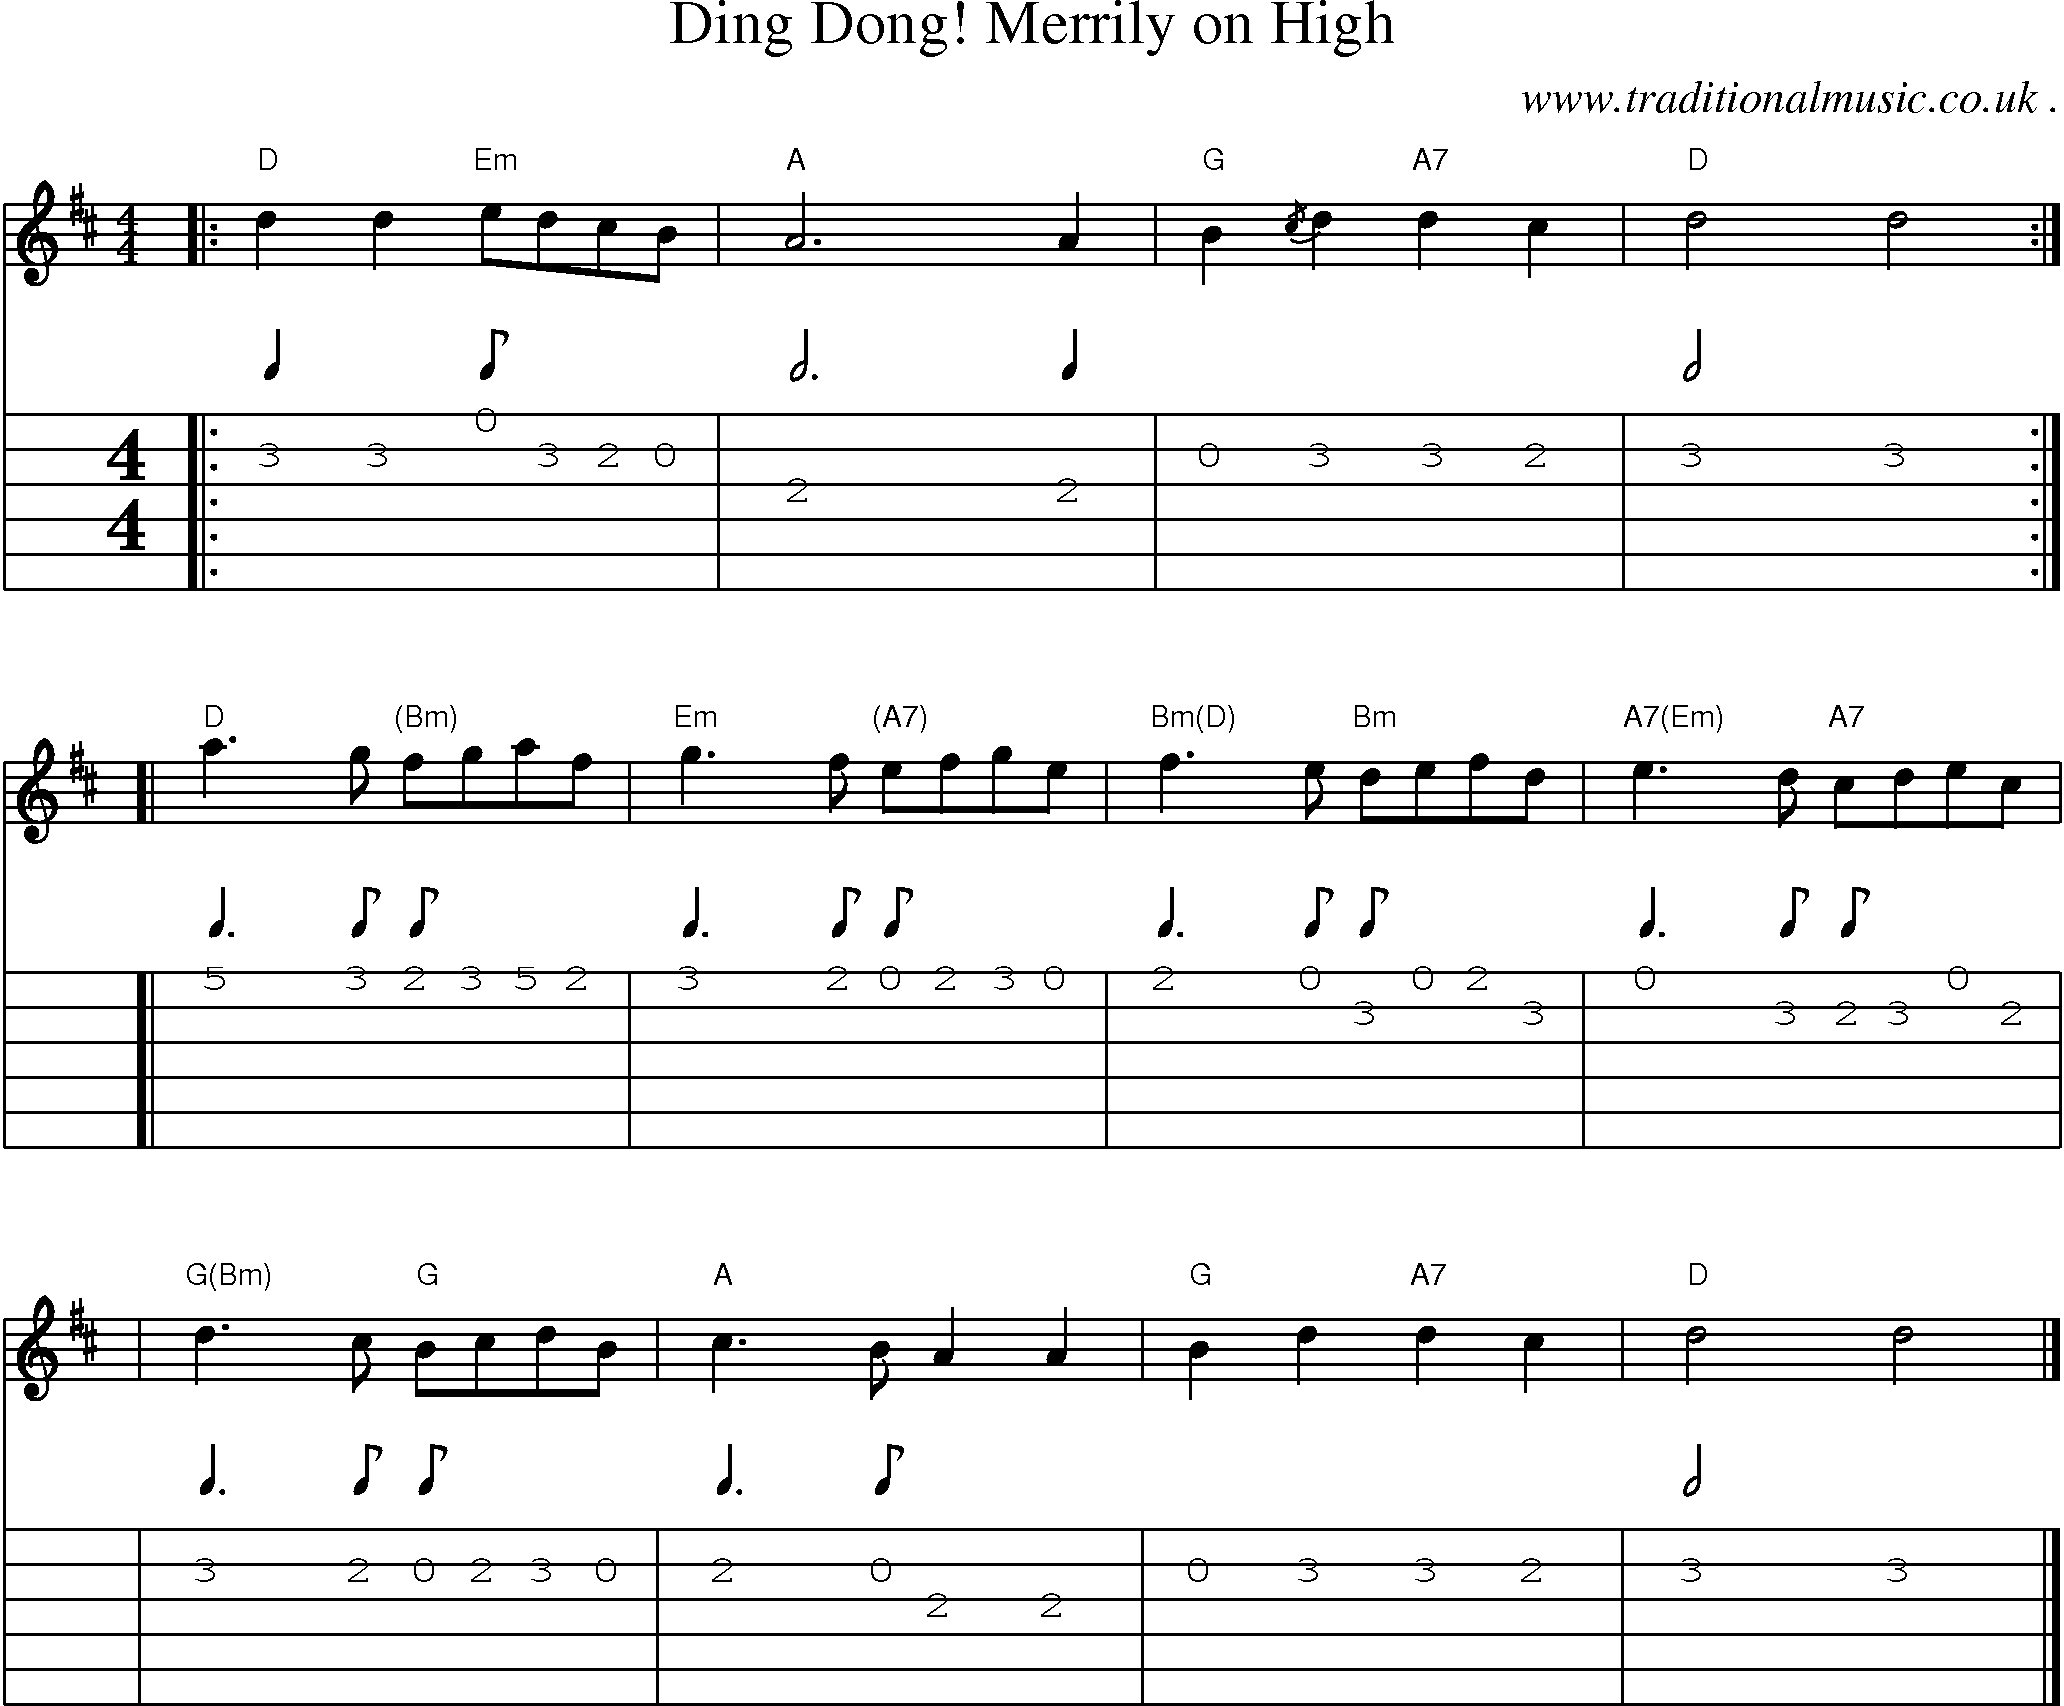 Sheet-music  score, Chords and Guitar Tabs for Ding Dong! Merrily On High